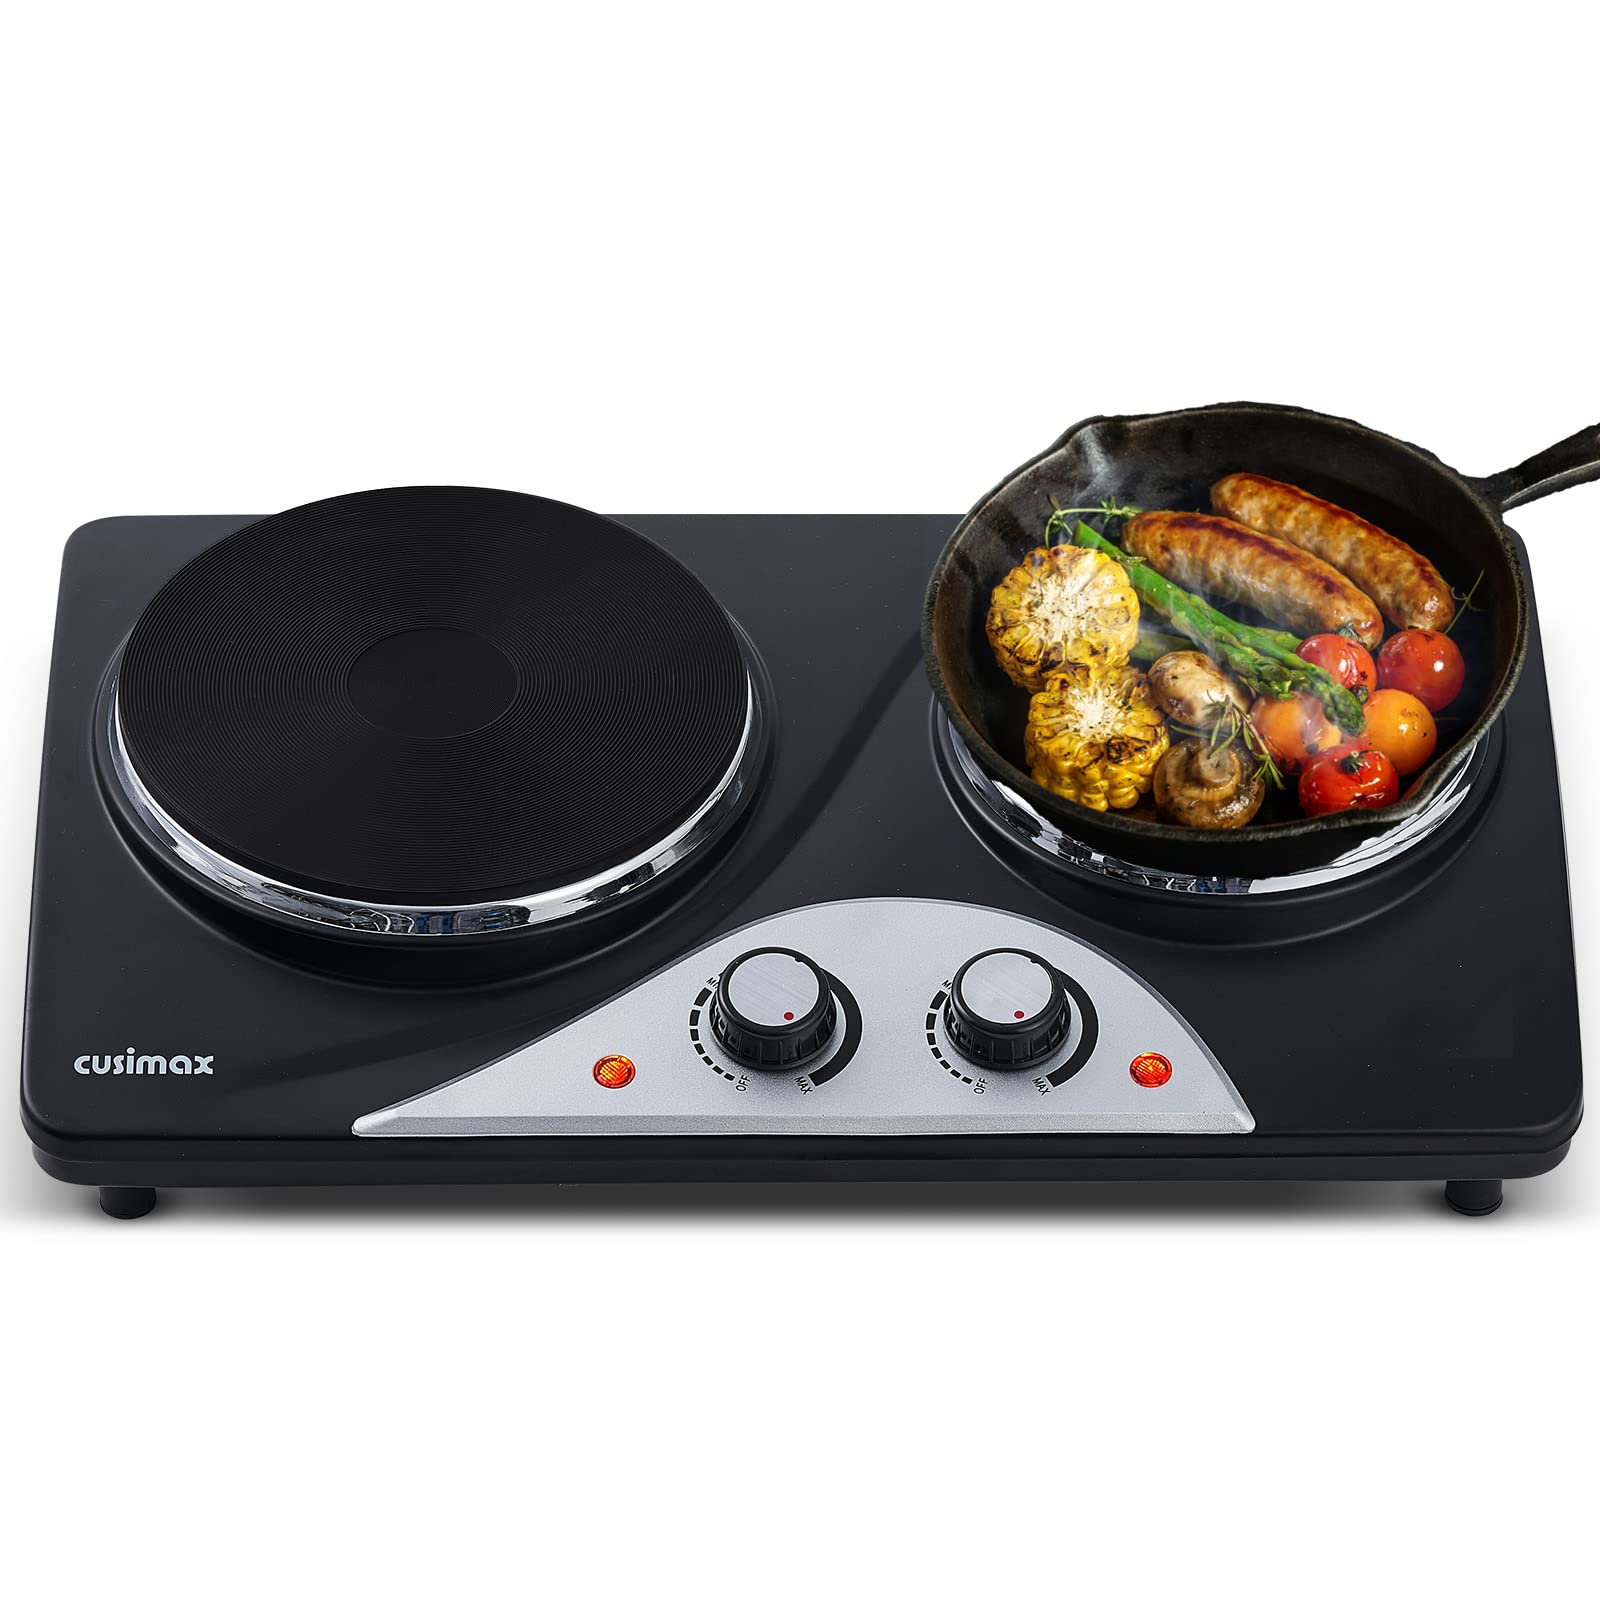 Cusimax Dual Temperature Control Black Stainless Steel Hot Plate